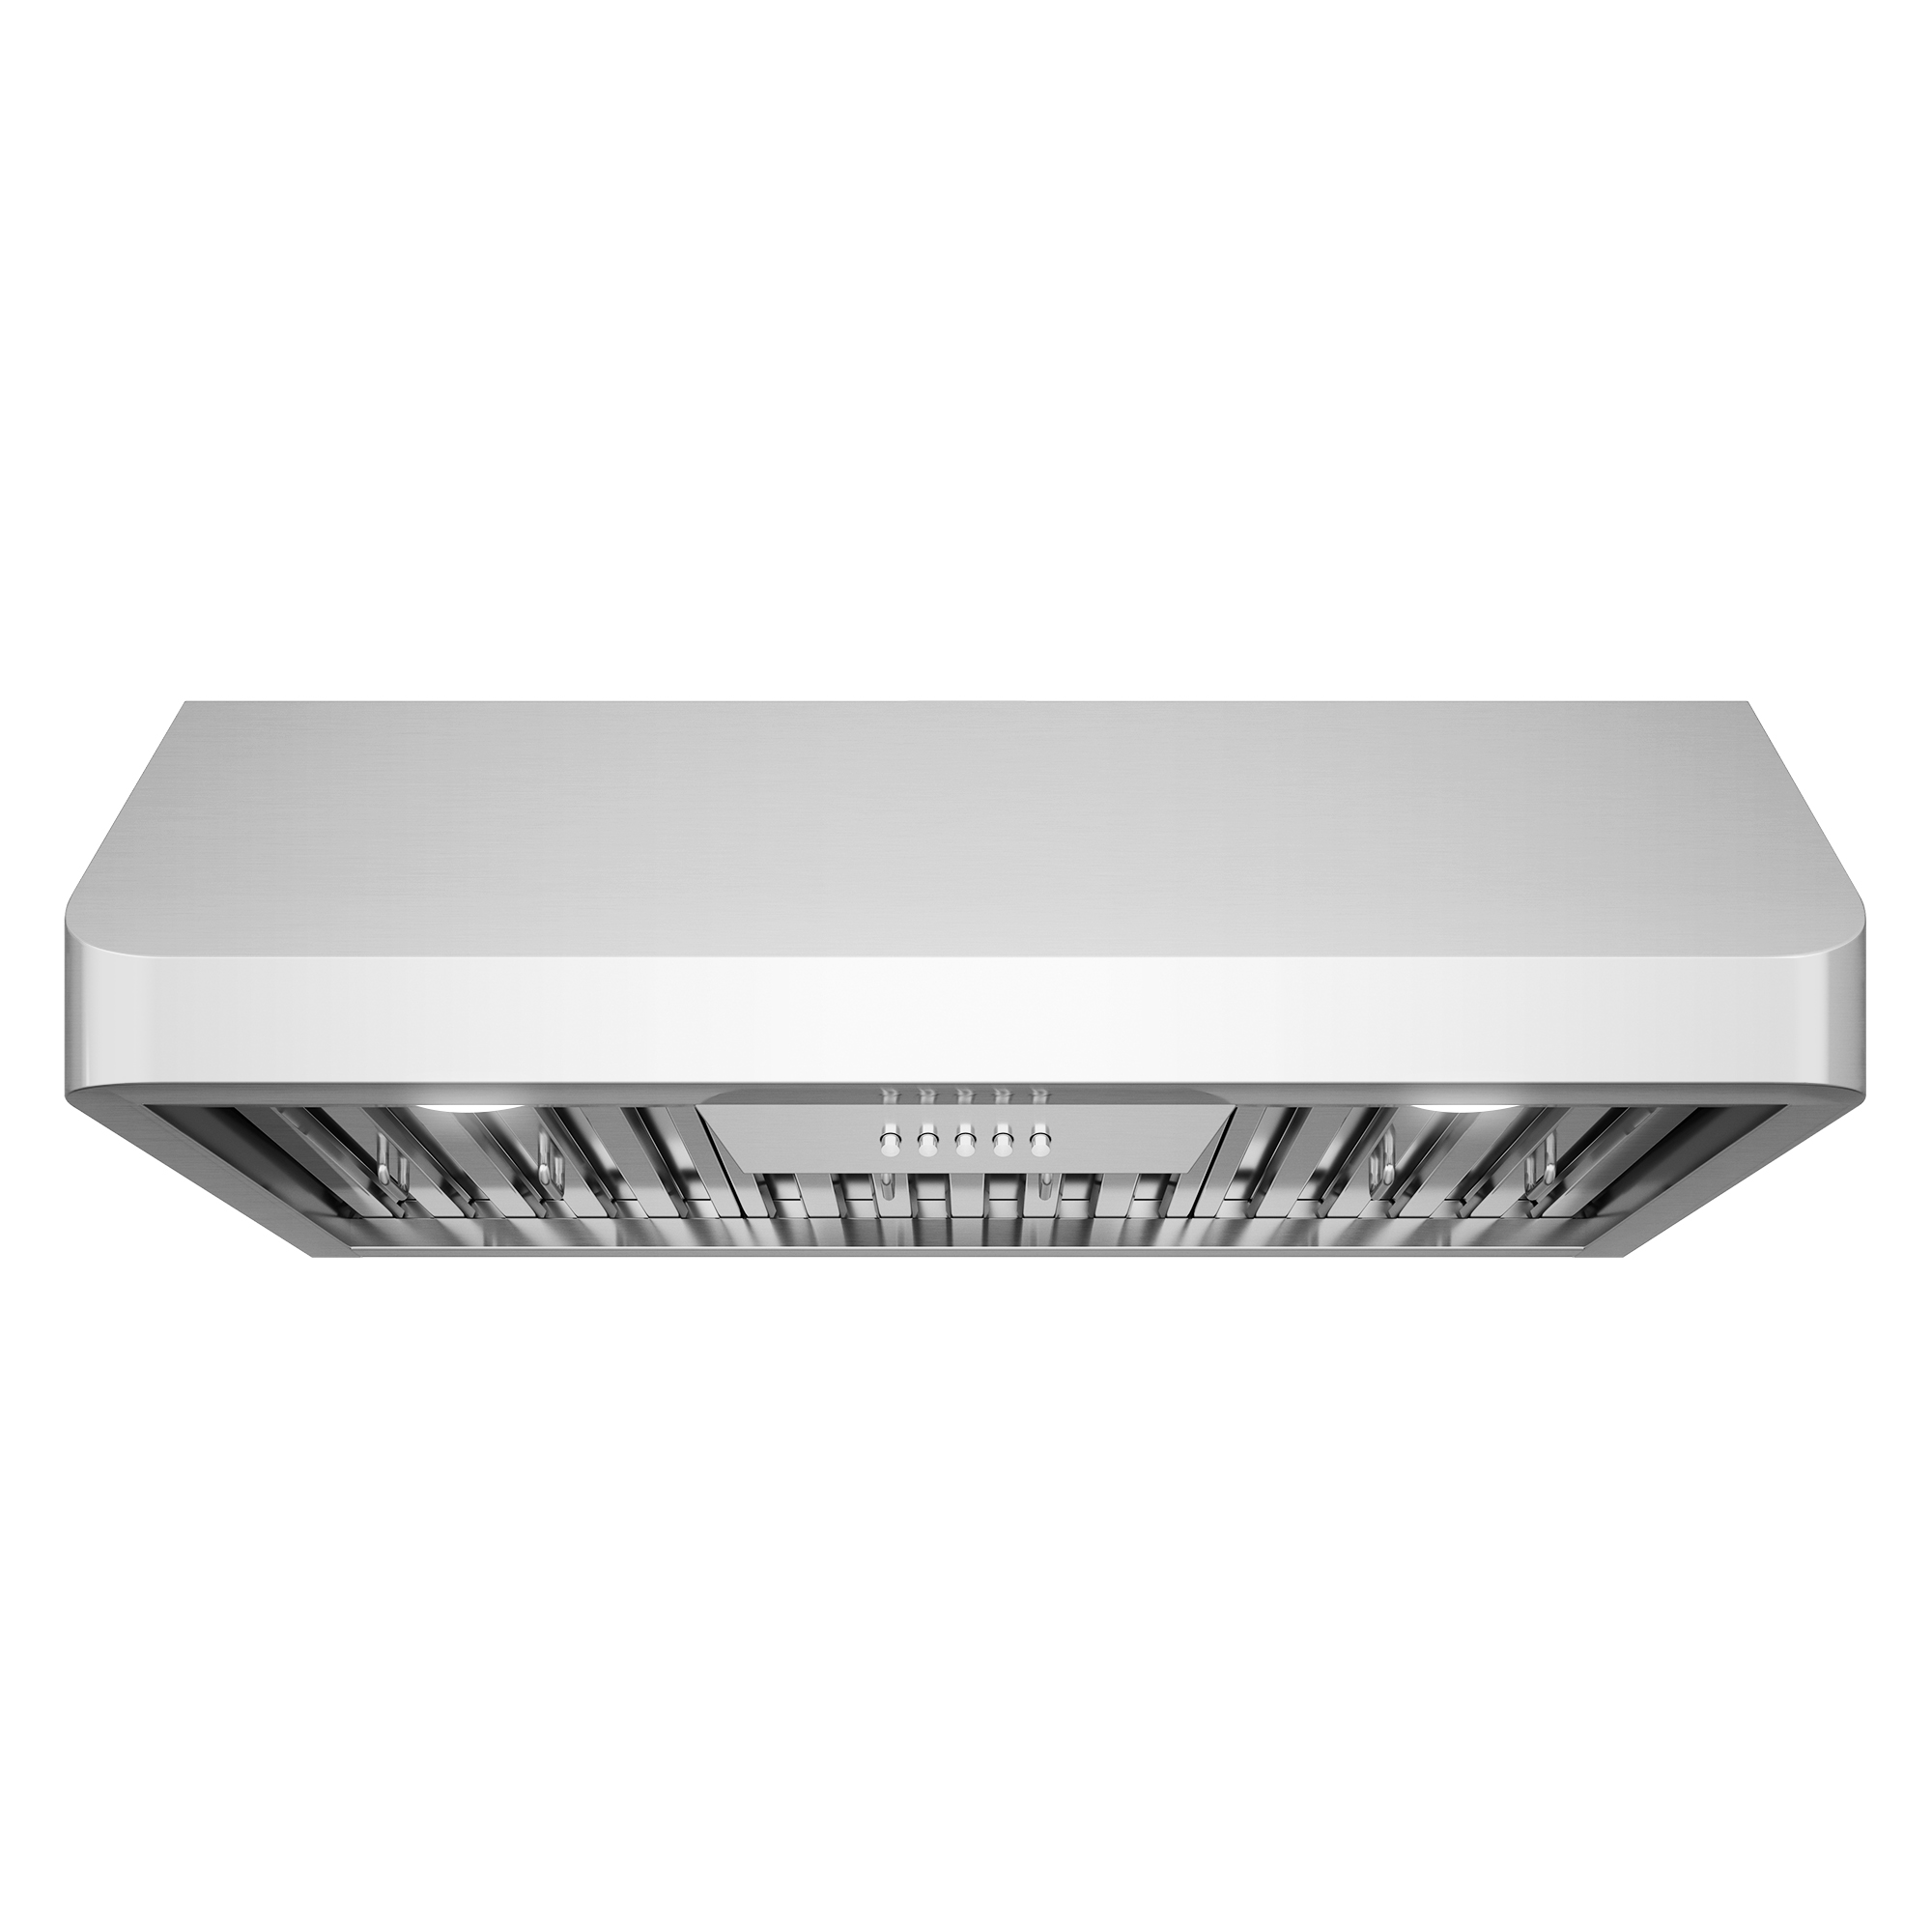 Cosmo UC30 30-Inch 760 CFM Ducted Under Cabinet Stainless Steel Range Hood